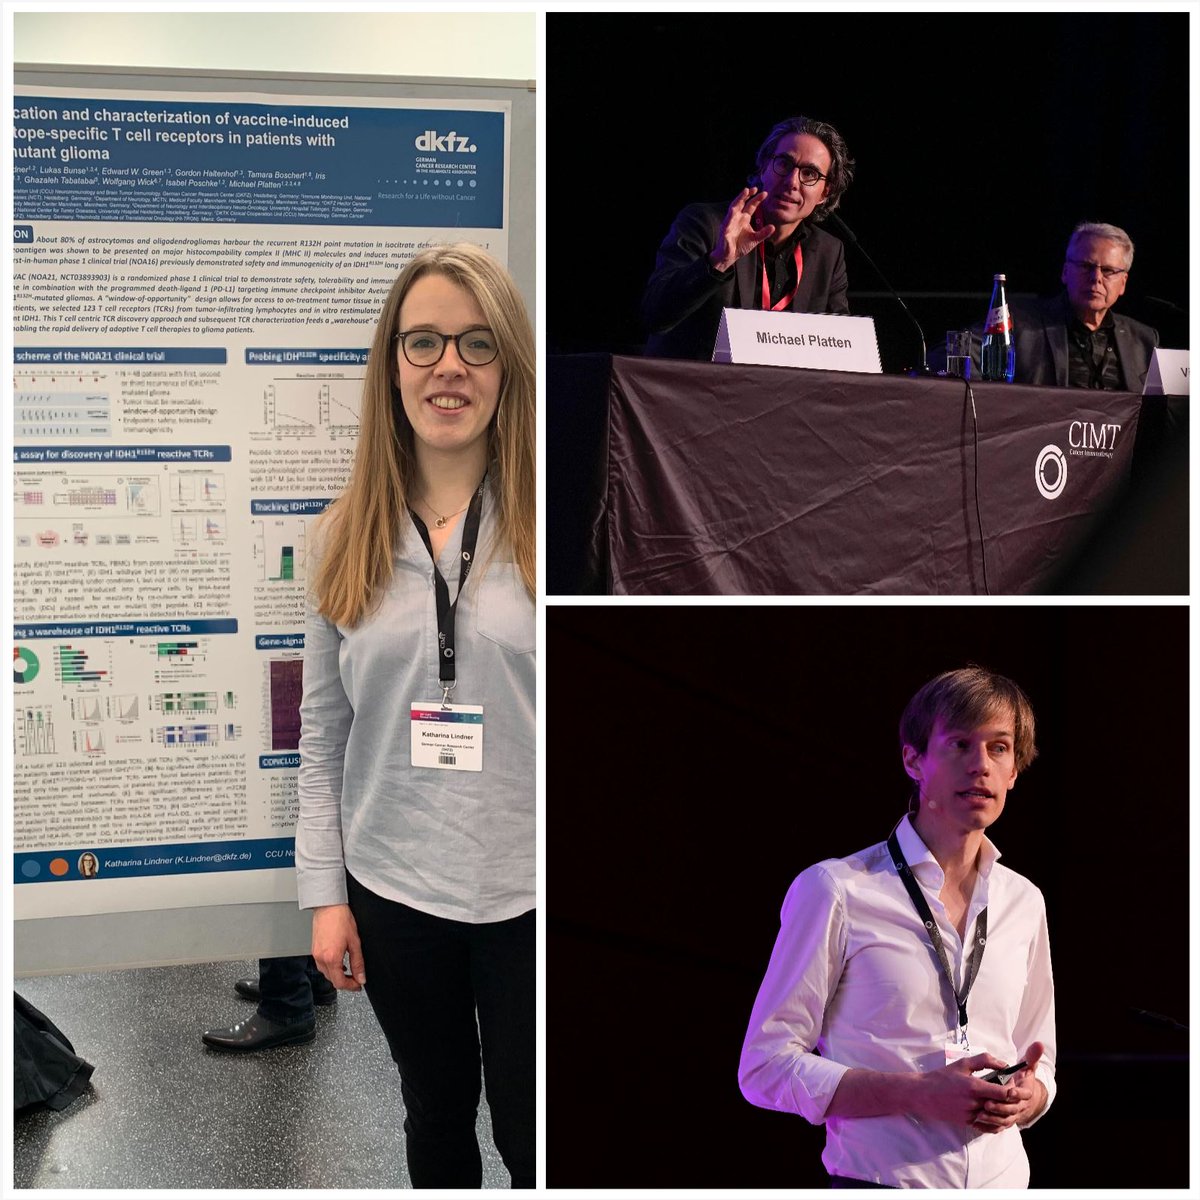 Last week our PhD students Katharina Lindner, Tamara Boschert and Chin Leng Tan and clinician scientist Niklas Graßl had the opportunity to present their research at the @C_IMT annual meeting! Fantastic event with great discussions! (pictures by Andrea Enderlein) @DKFZImmunology